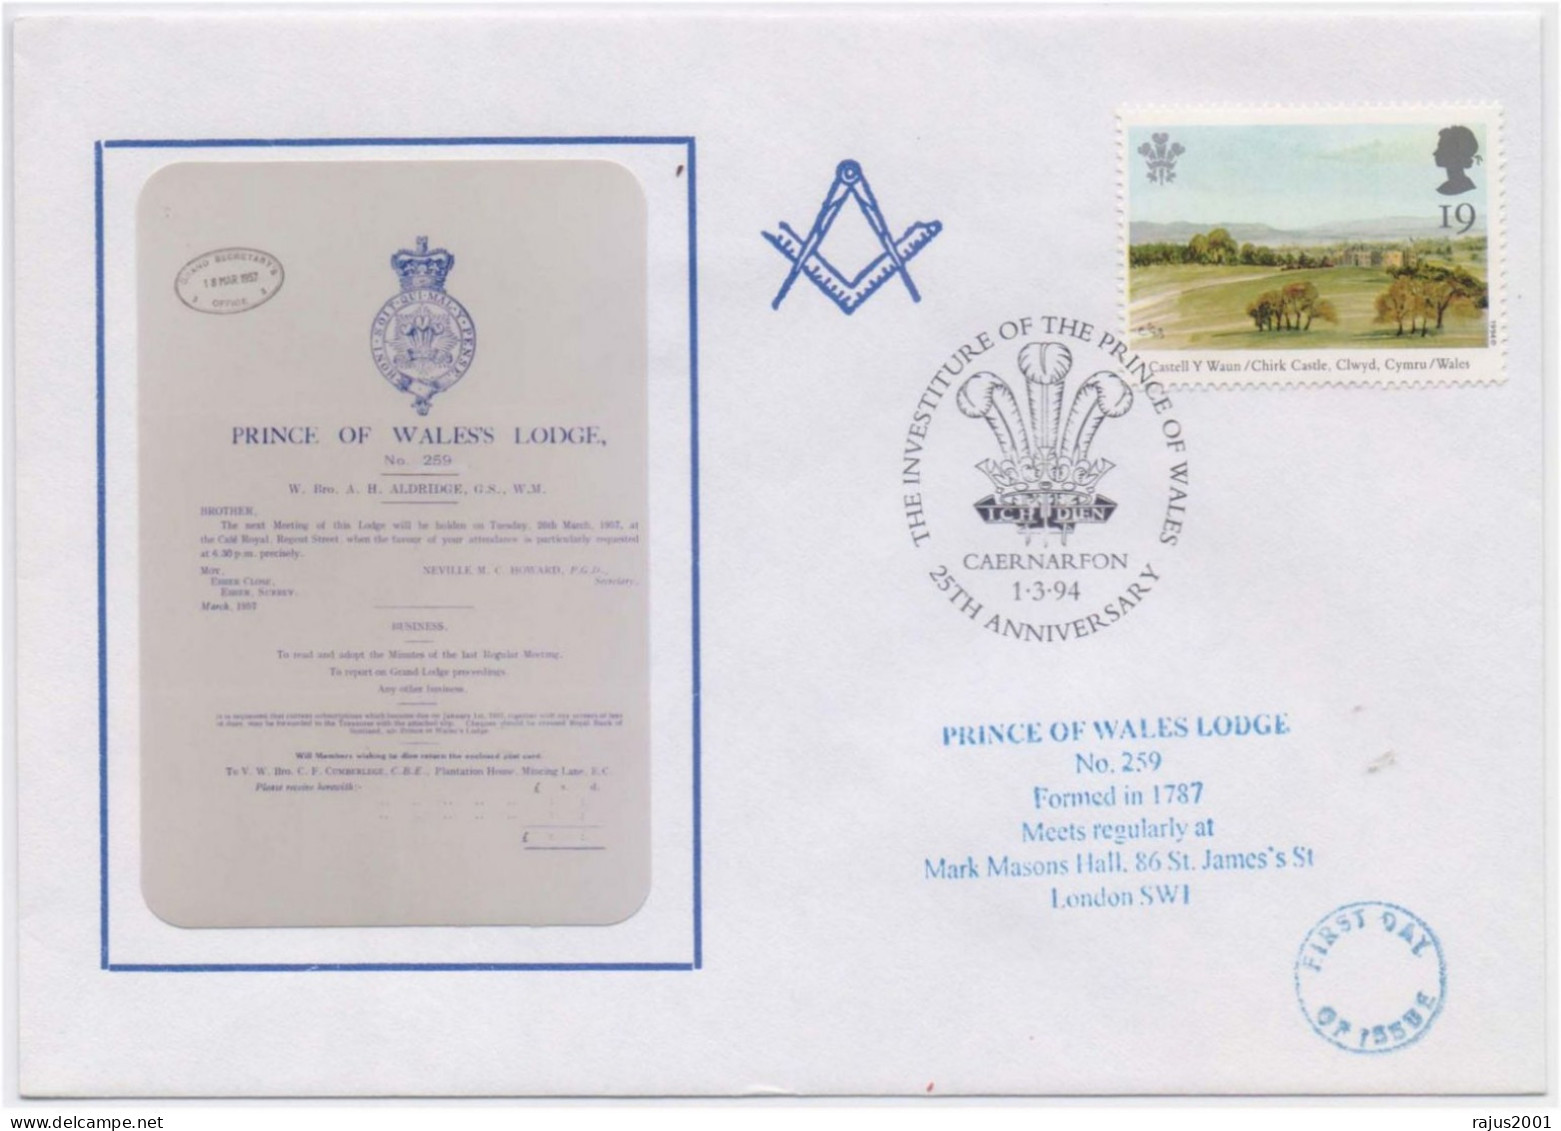 PRINCE OF WALES LODGE NO 259, FORMED IN 1787, Freemasonry Masonic Limited Only 75 Cover Issued Great Britain Cover - Vrijmetselarij